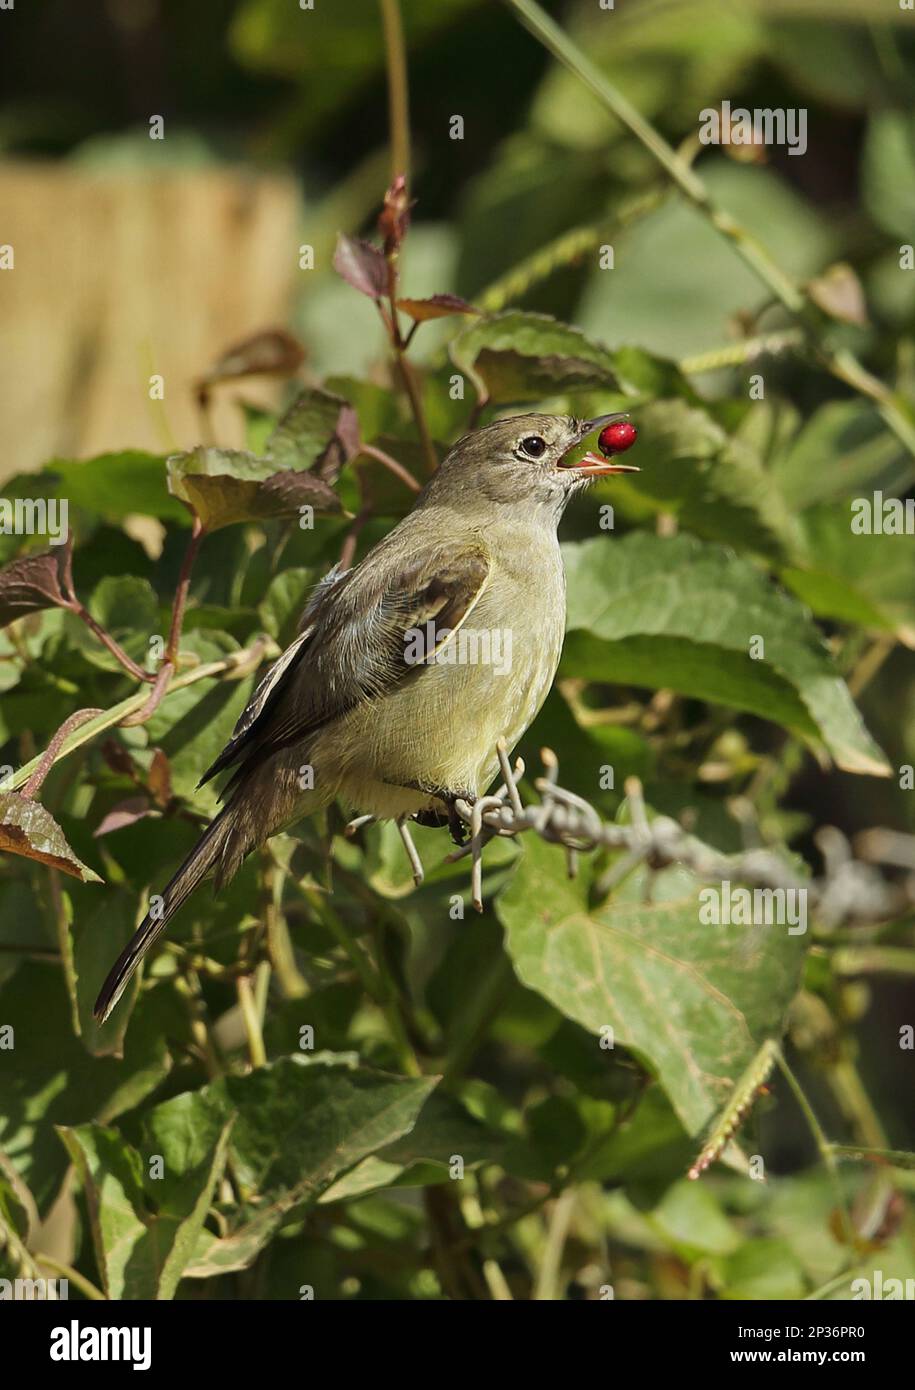 Yellow-bellied Elaenia (Elaenia flavogaster flavogaster) adult, feeding, tossing up and catching fruit in its beak, perched on barbed wire, Atlantic Stock Photo